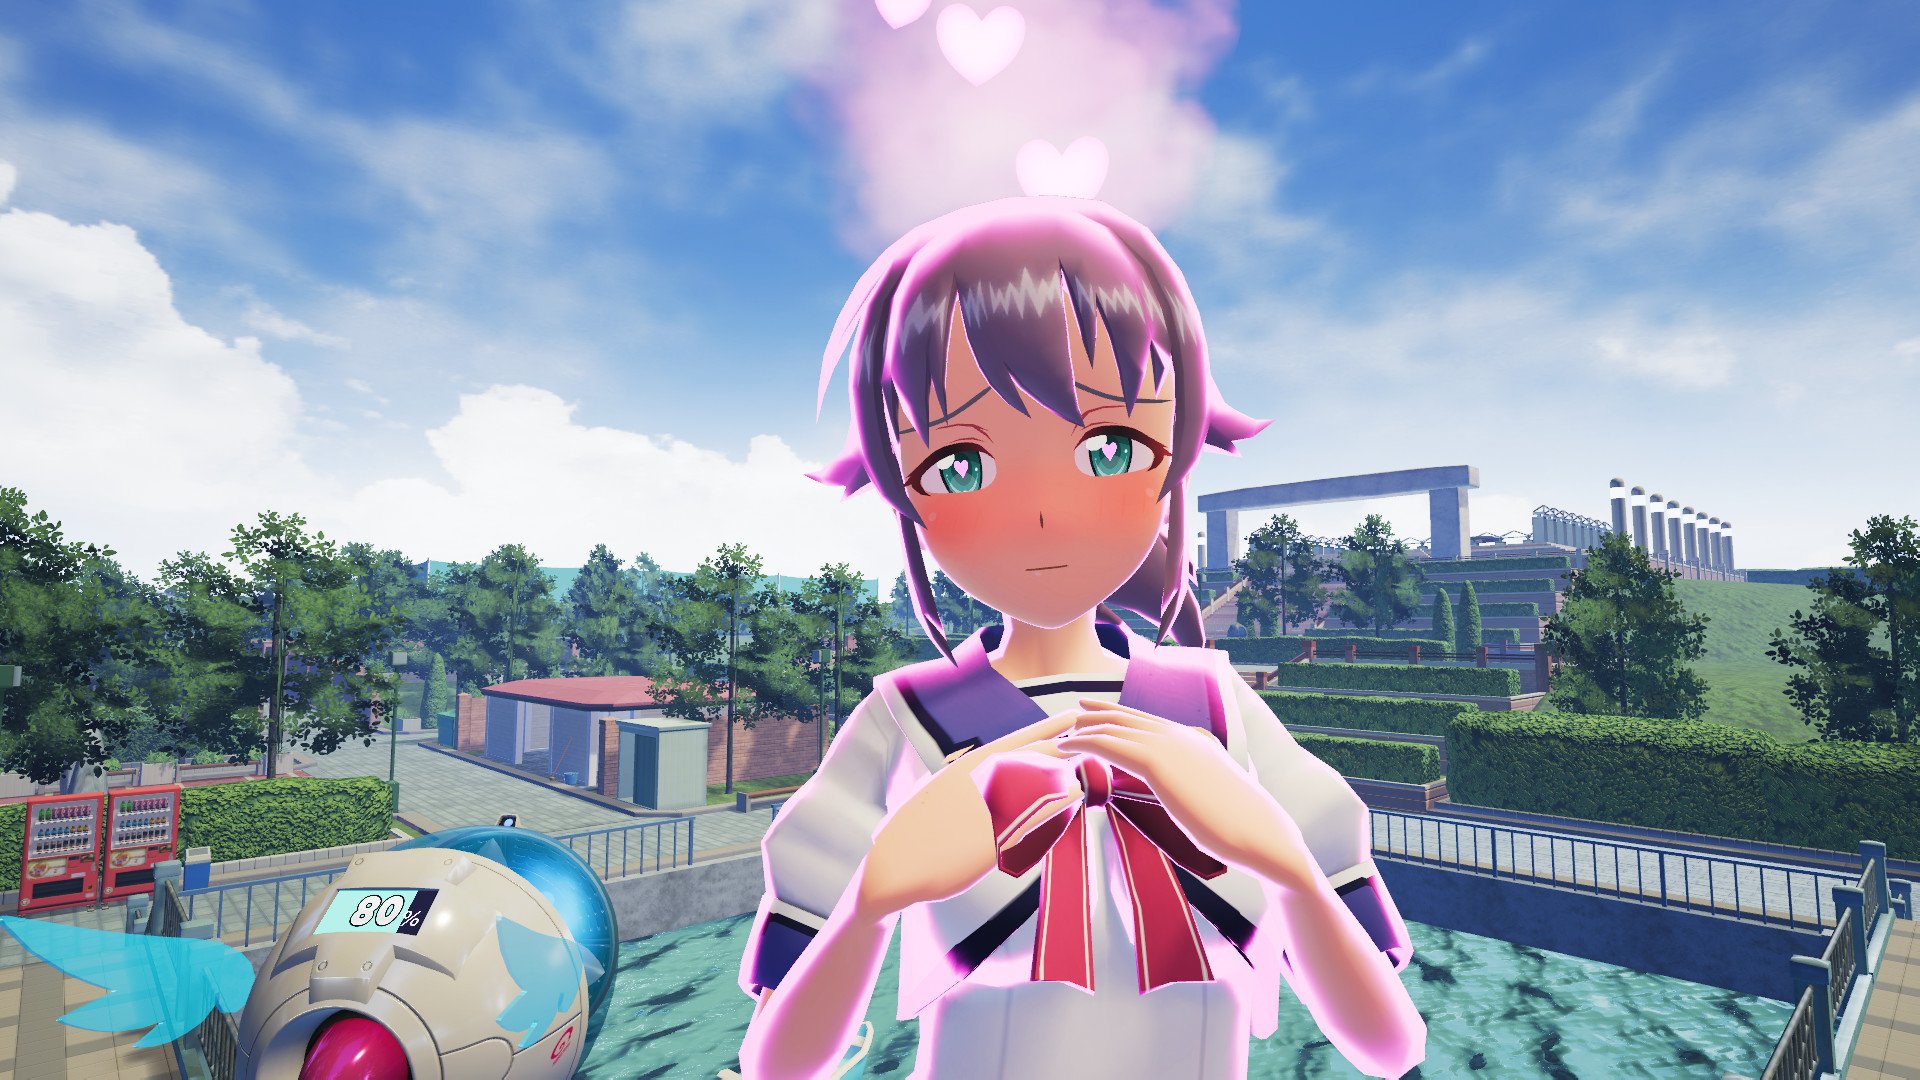 INTI CREATES on Twitter: "The Gal*Gun 2 Doki VR Mode DLC is here on Steam! That's right, every single aspect of 2, from shooting stages to heart-pounding rendezvous, is fine-tuned